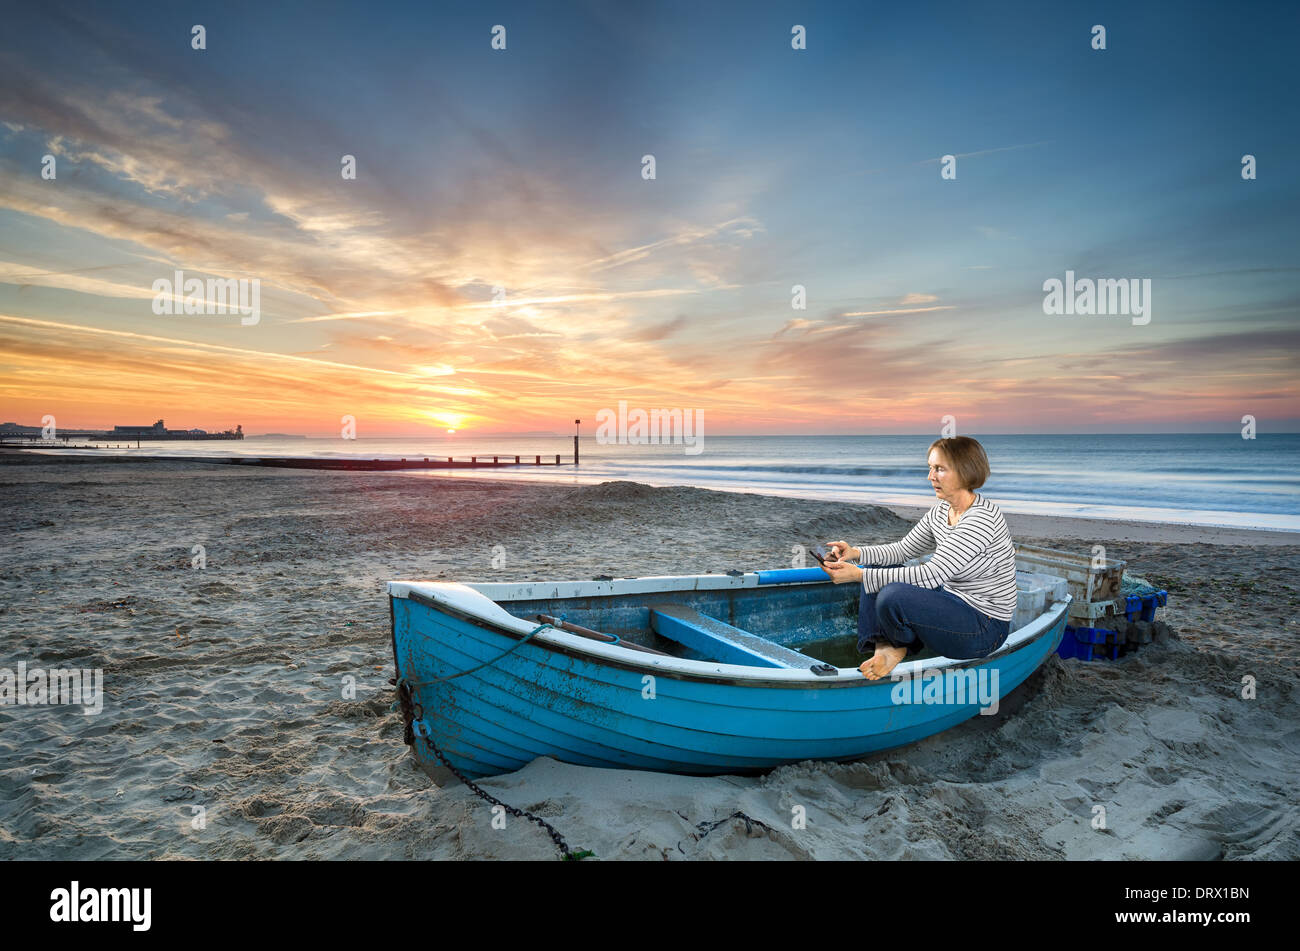 Mature woman in 50's using tablet device at sunrise on an idyllic beach Stock Photo